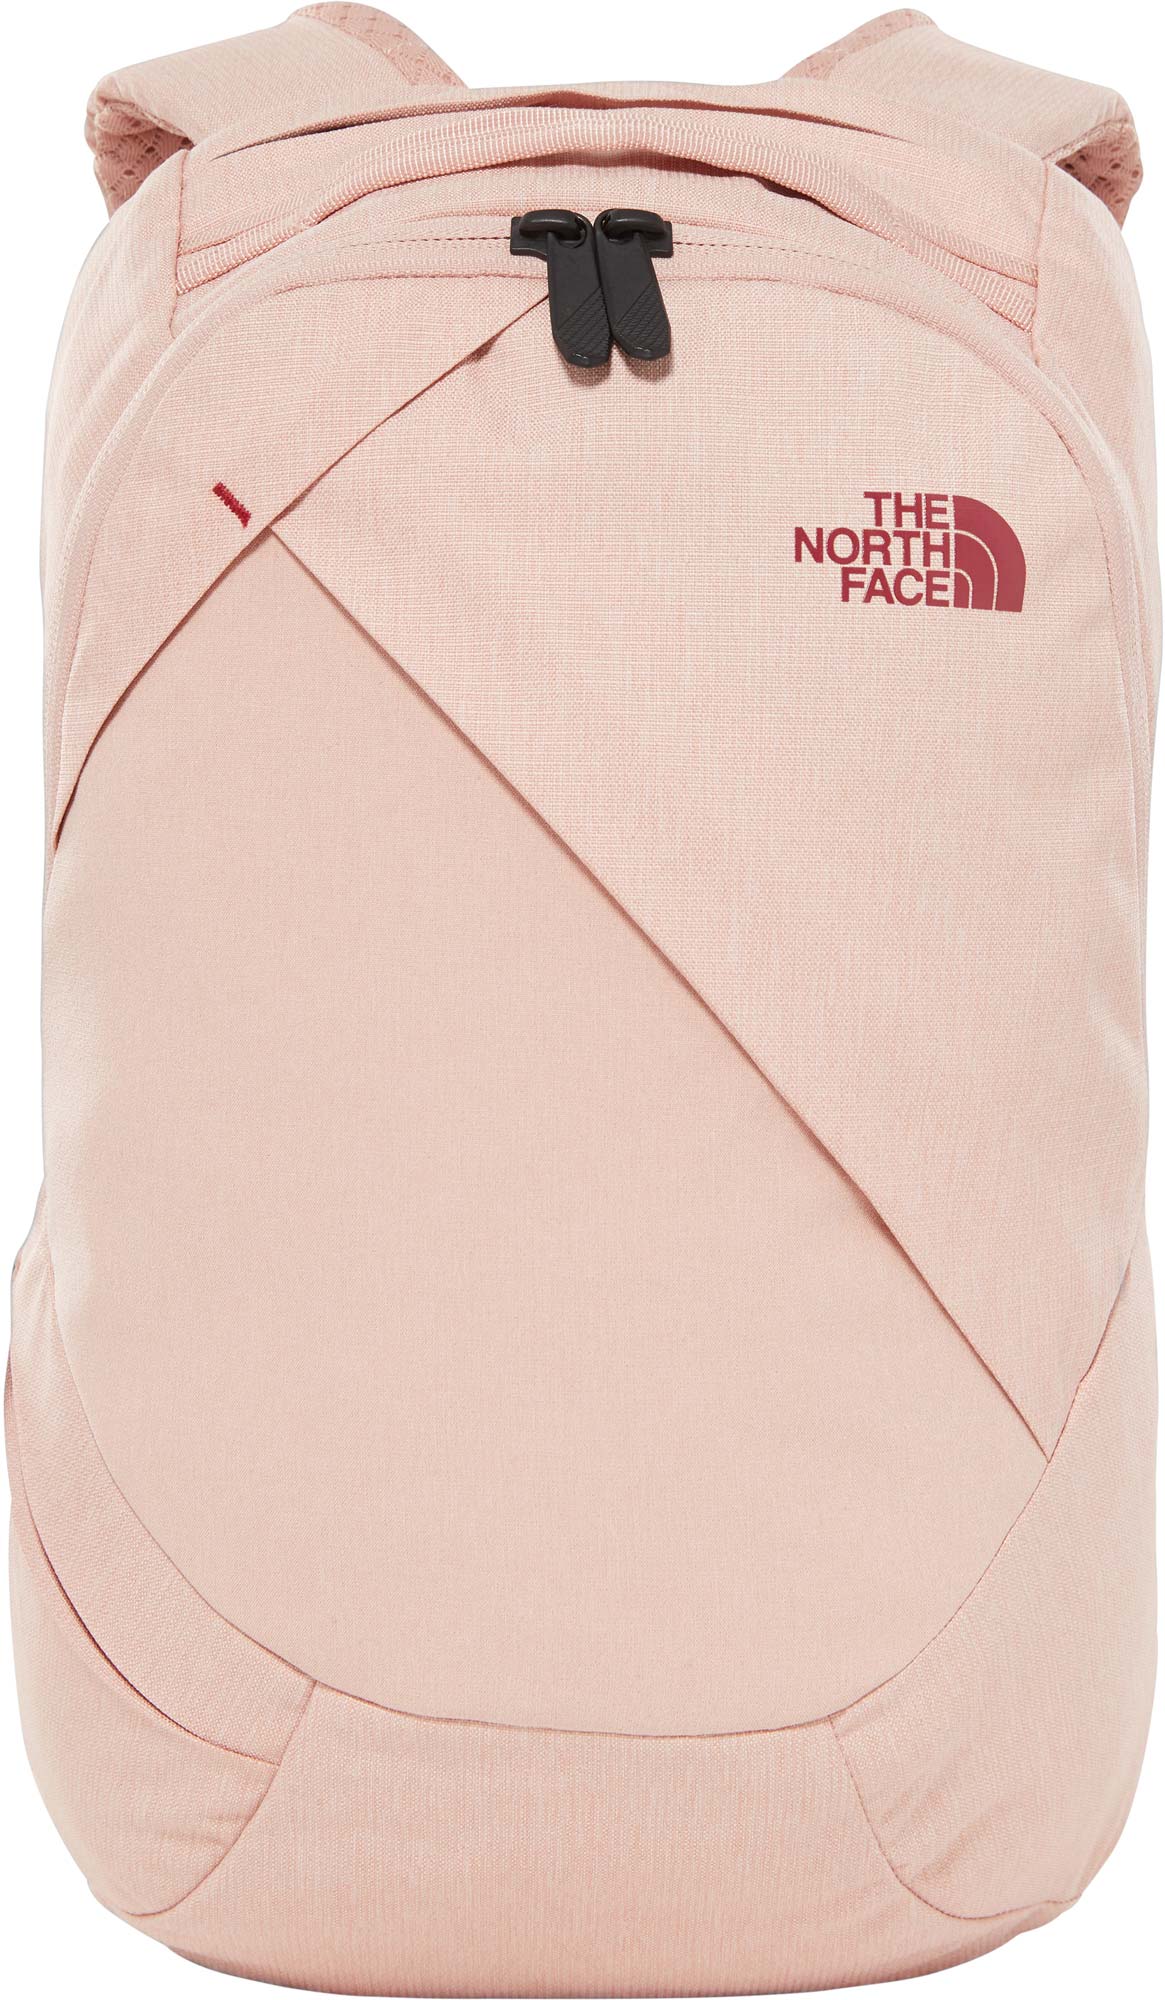 the north face cz